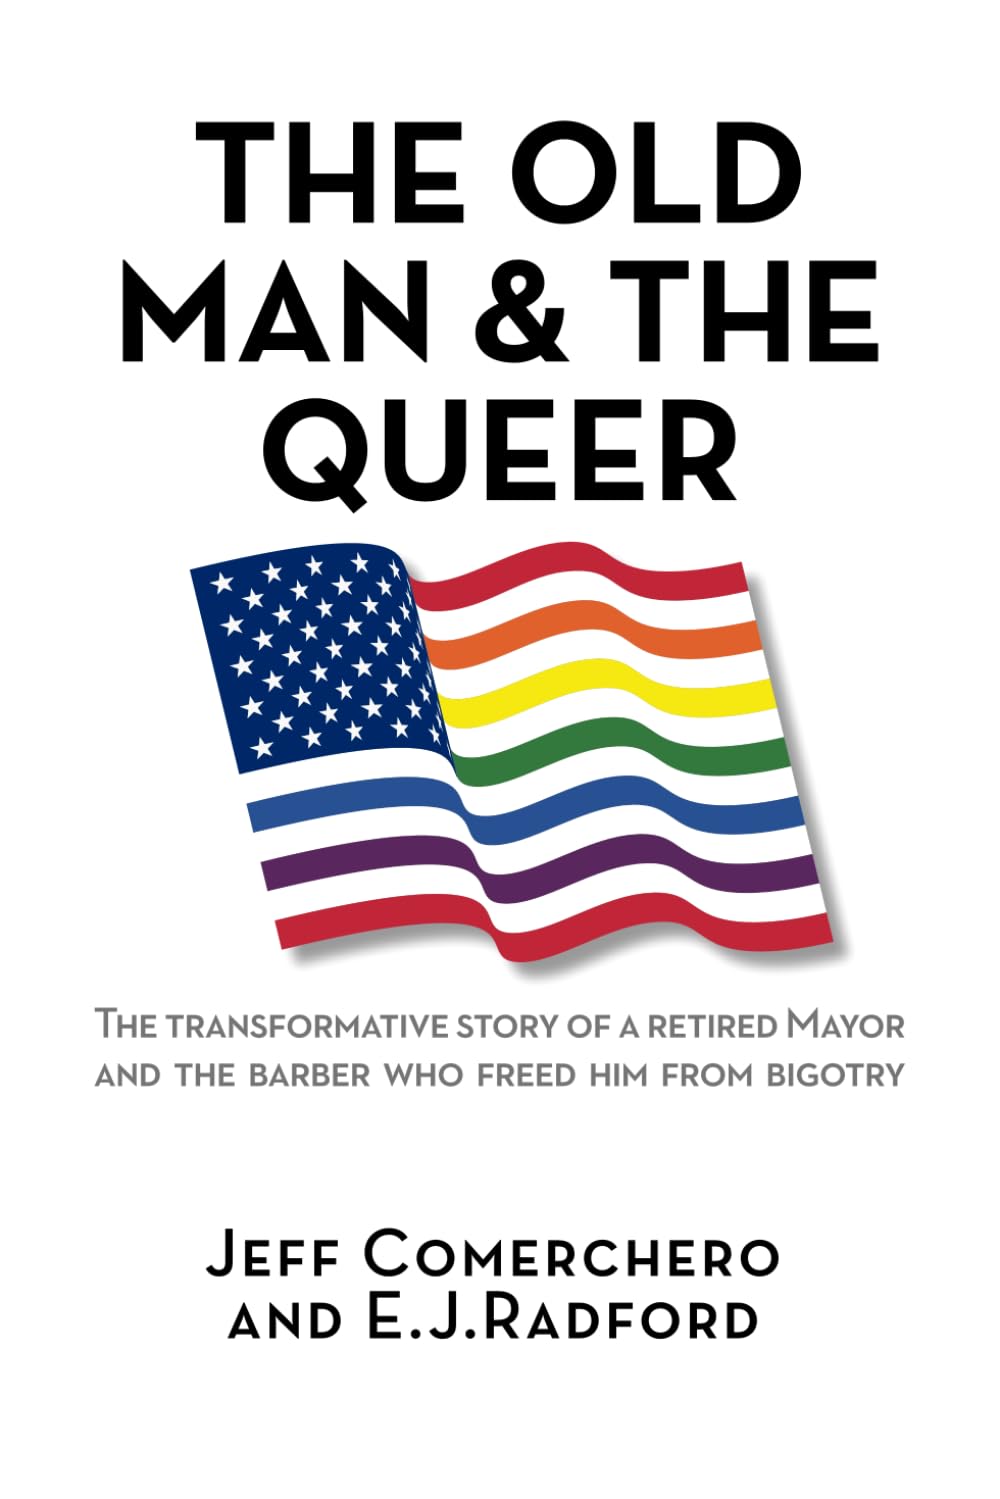 The Old Man and the Queer: The Transformative Story of a Retired Mayor and the Barber Who Freed Him from Bigotry